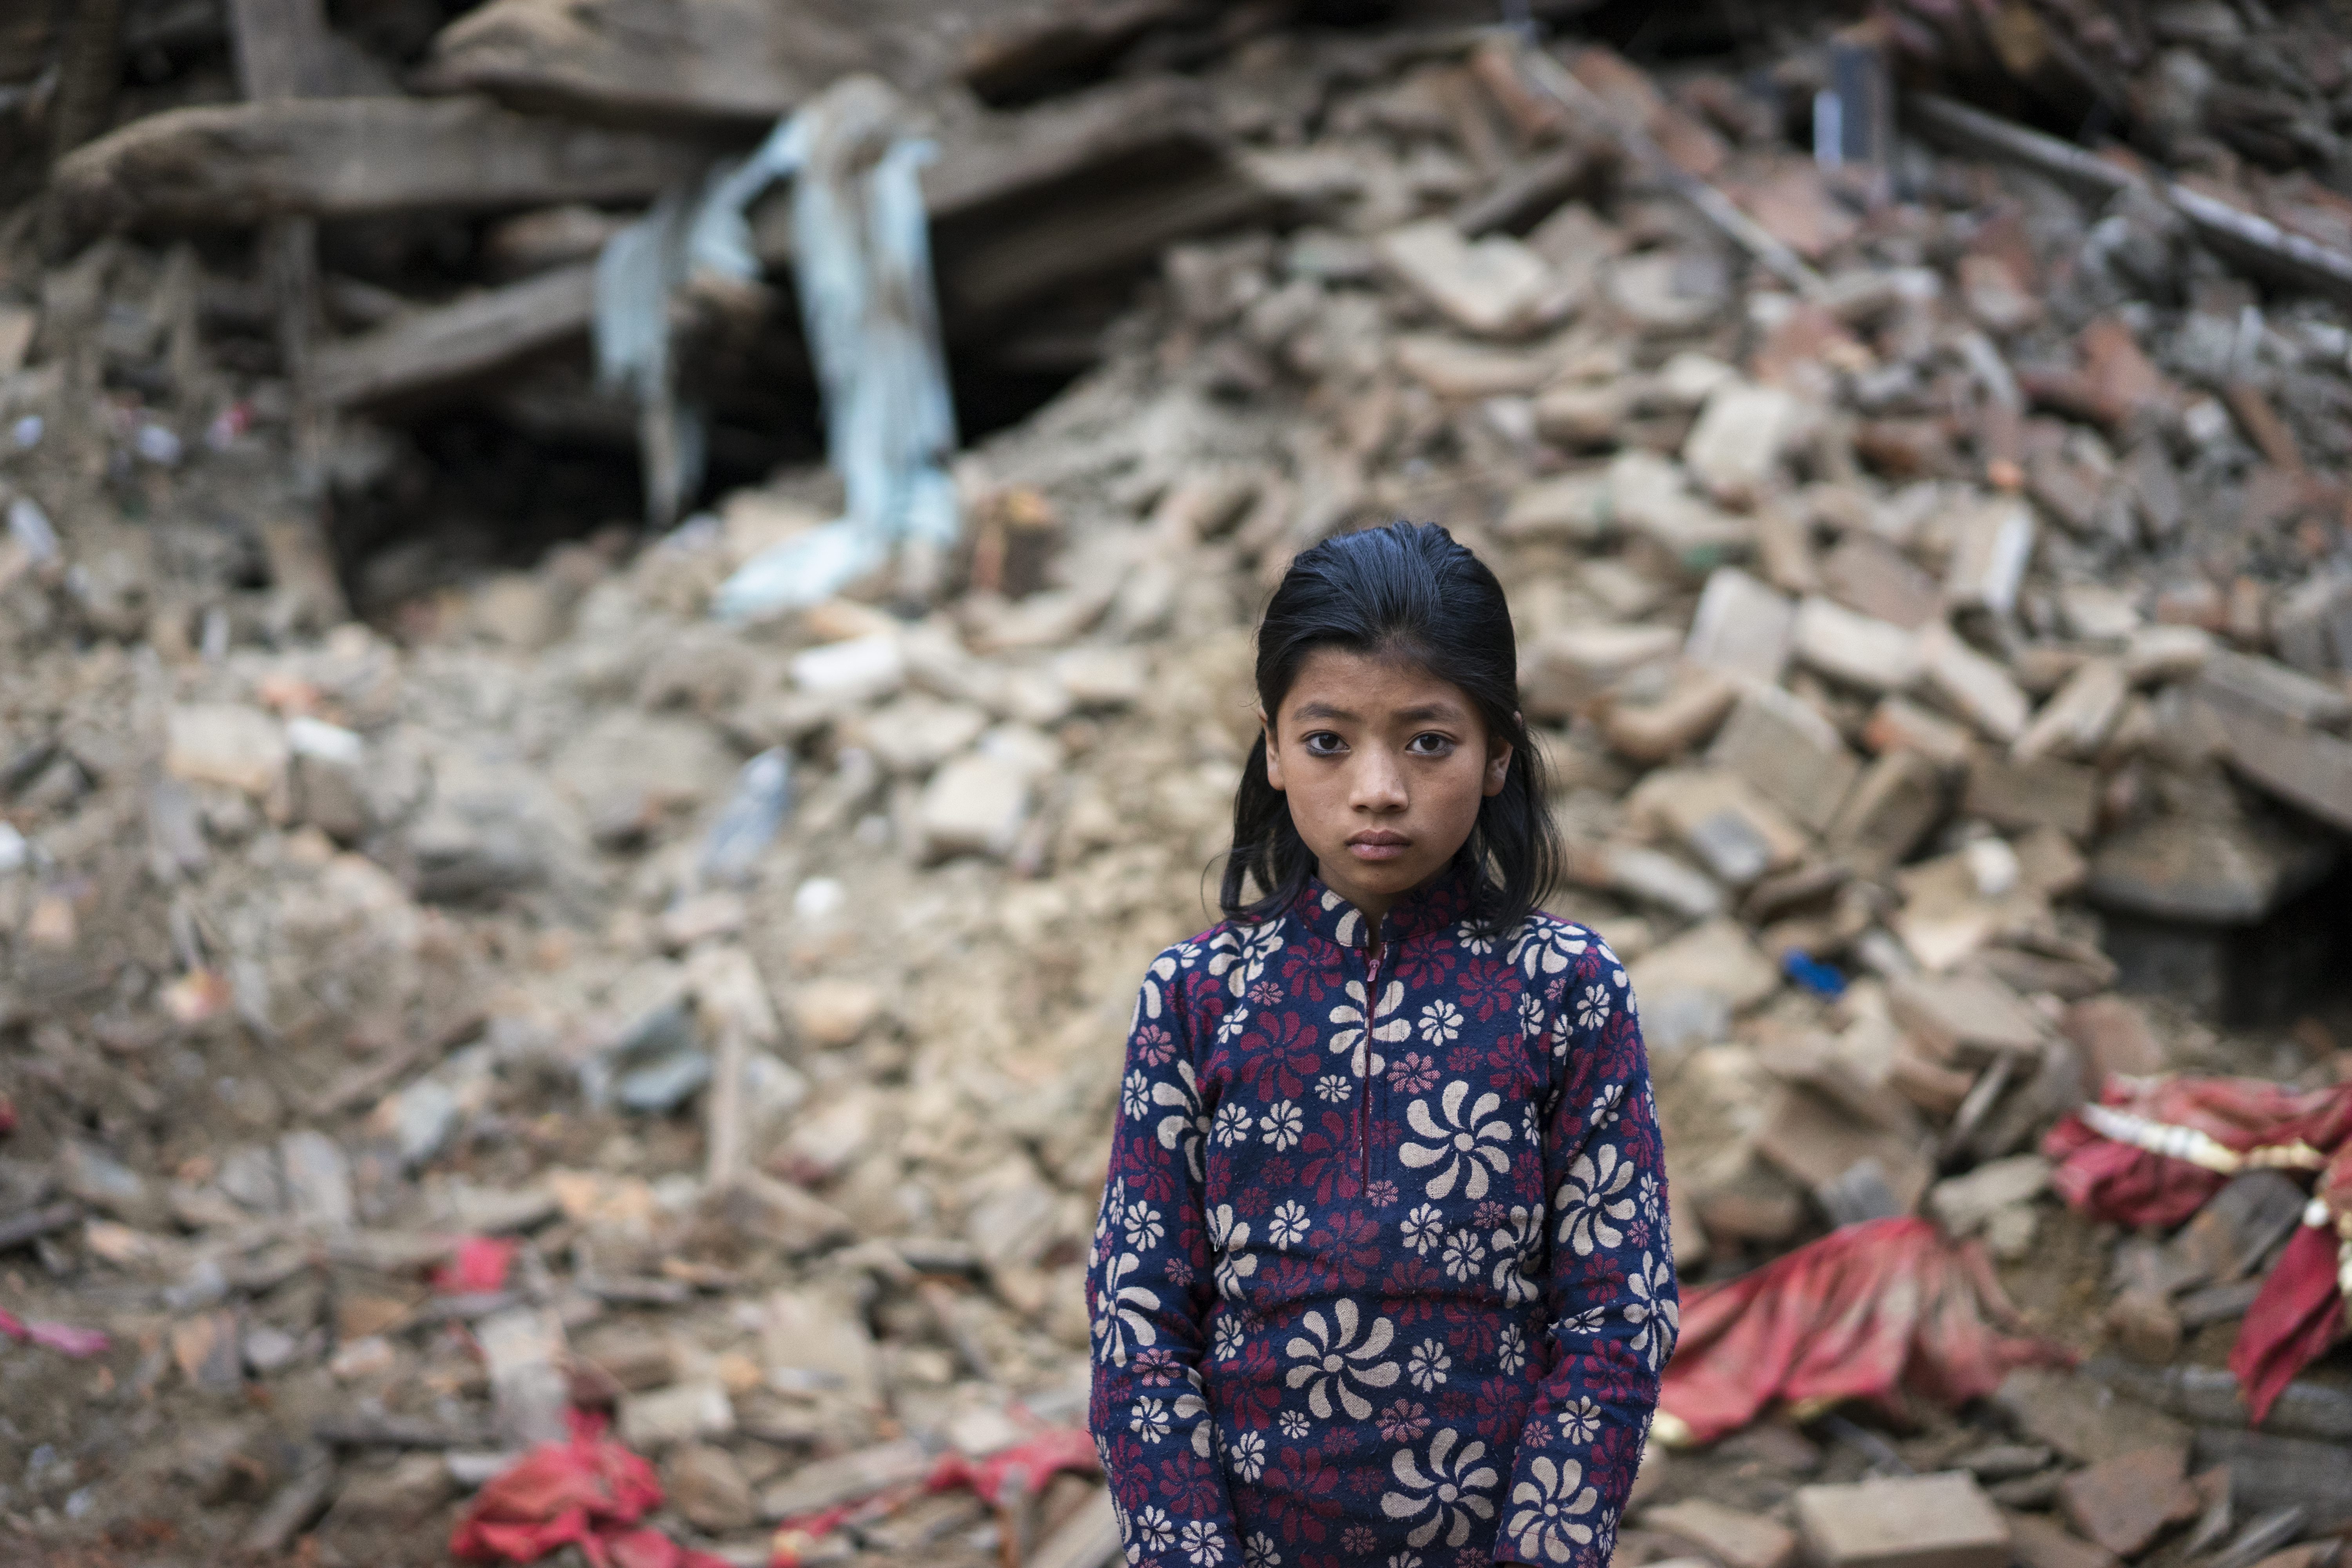 12-year-old Nanu Tatya standing in front of a rubble in Bhaktapur in the outskirts of Kathmandu.  Nanu is still scared from the earthquake. She was too afraid to speak about the massive quake and the aftershocks. Her relatives said her house had been destroyed and she was living in a plastic tent with her family. / UNHCR / Brian Sokol / 29 April 2015